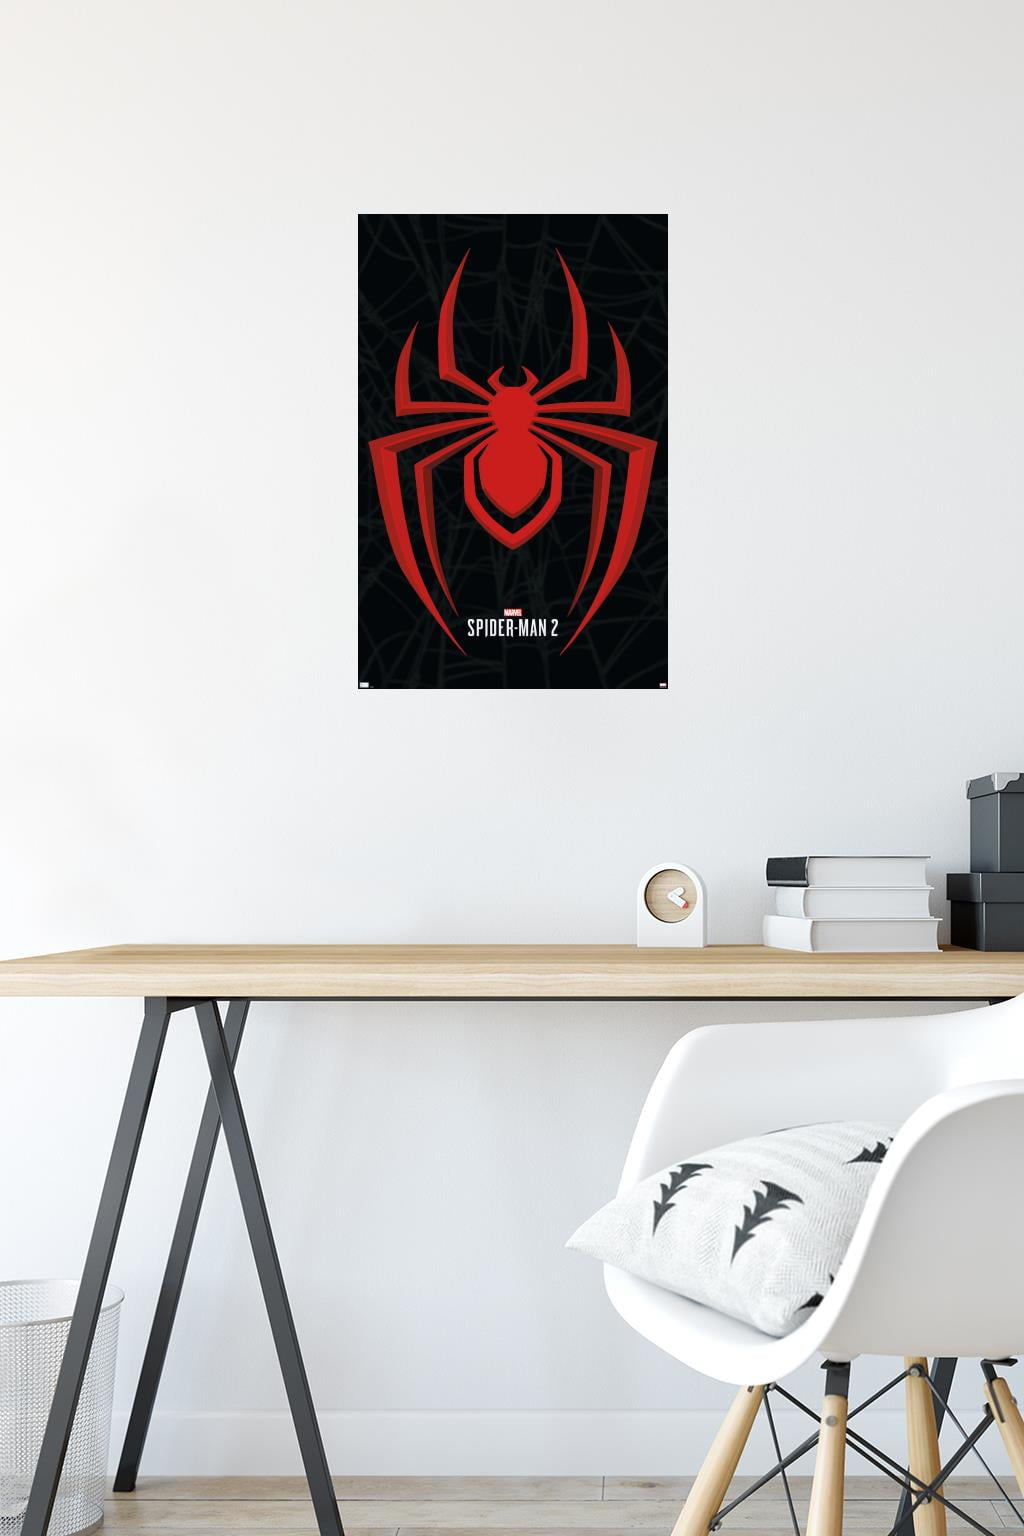 Spider-Man 2 Game Poster, an art print by Cizgi Neon - INPRNT